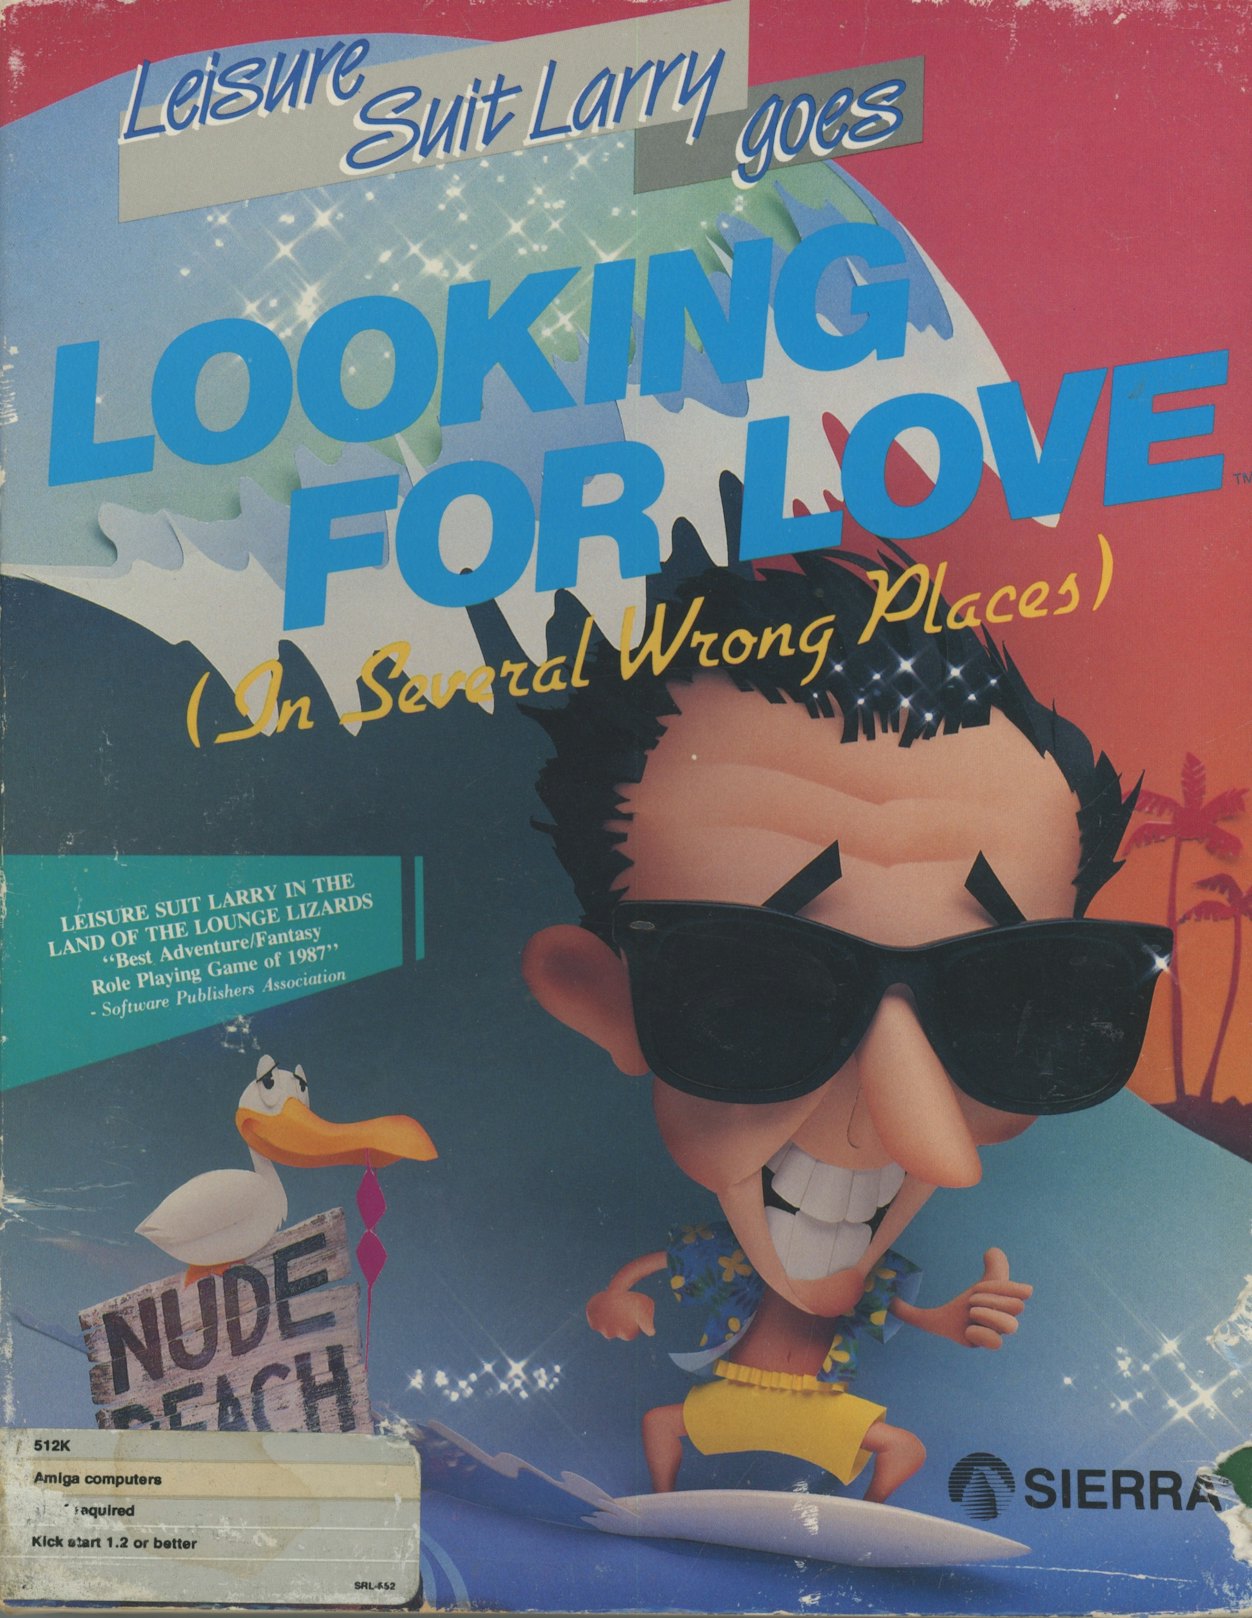 Leisure Suit Larry 2: Larry Goes Looking for Love (In Several Wrong Places)